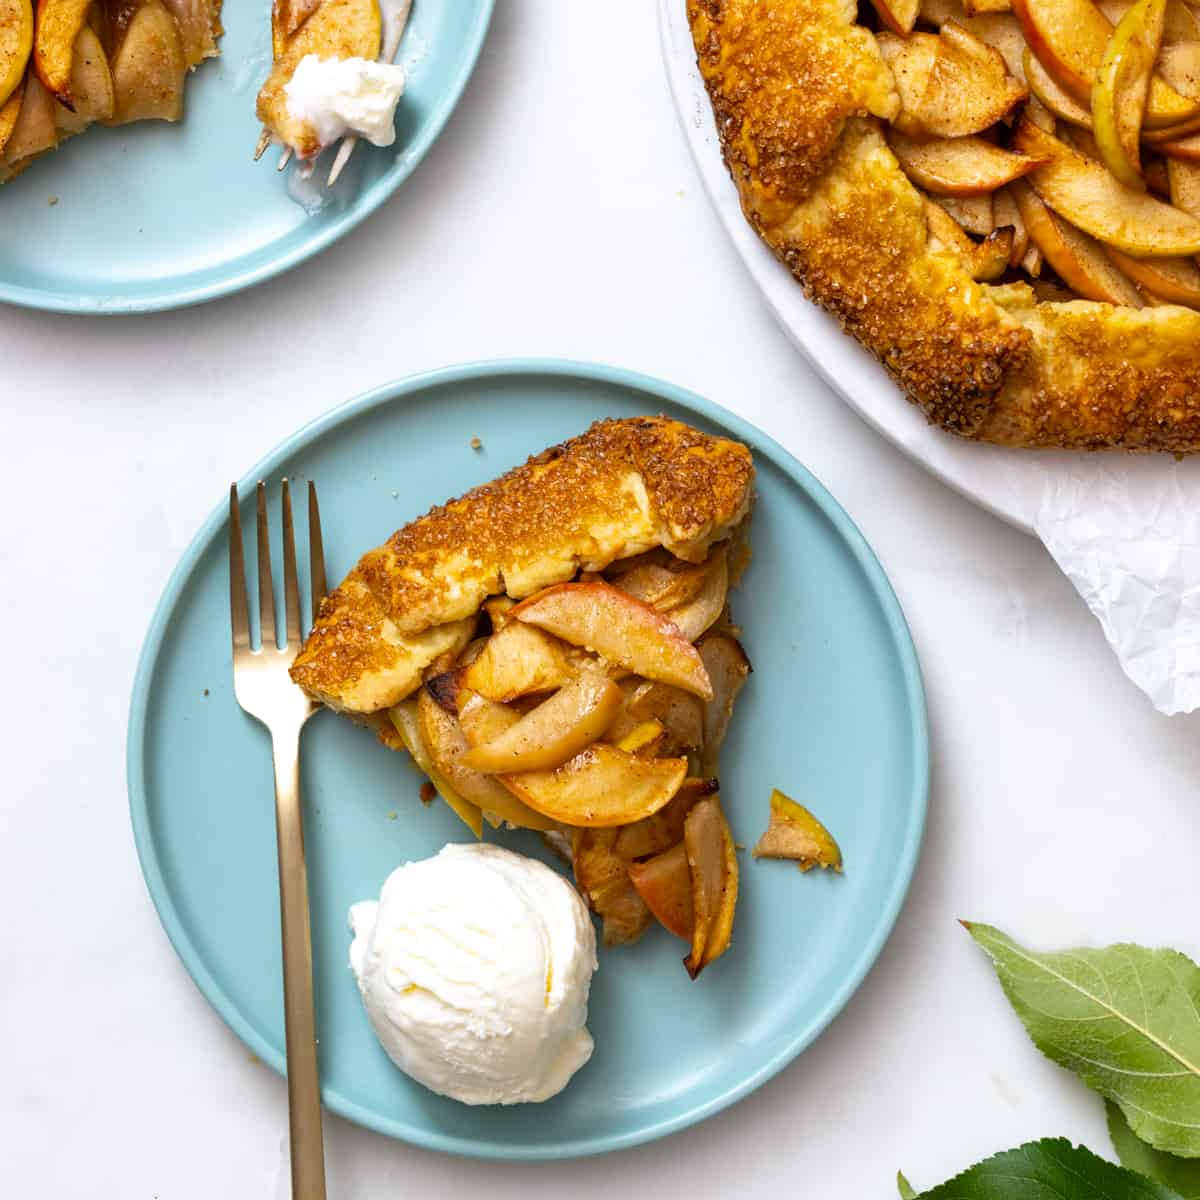 Apple Cheddar Galette by Baking The Goods